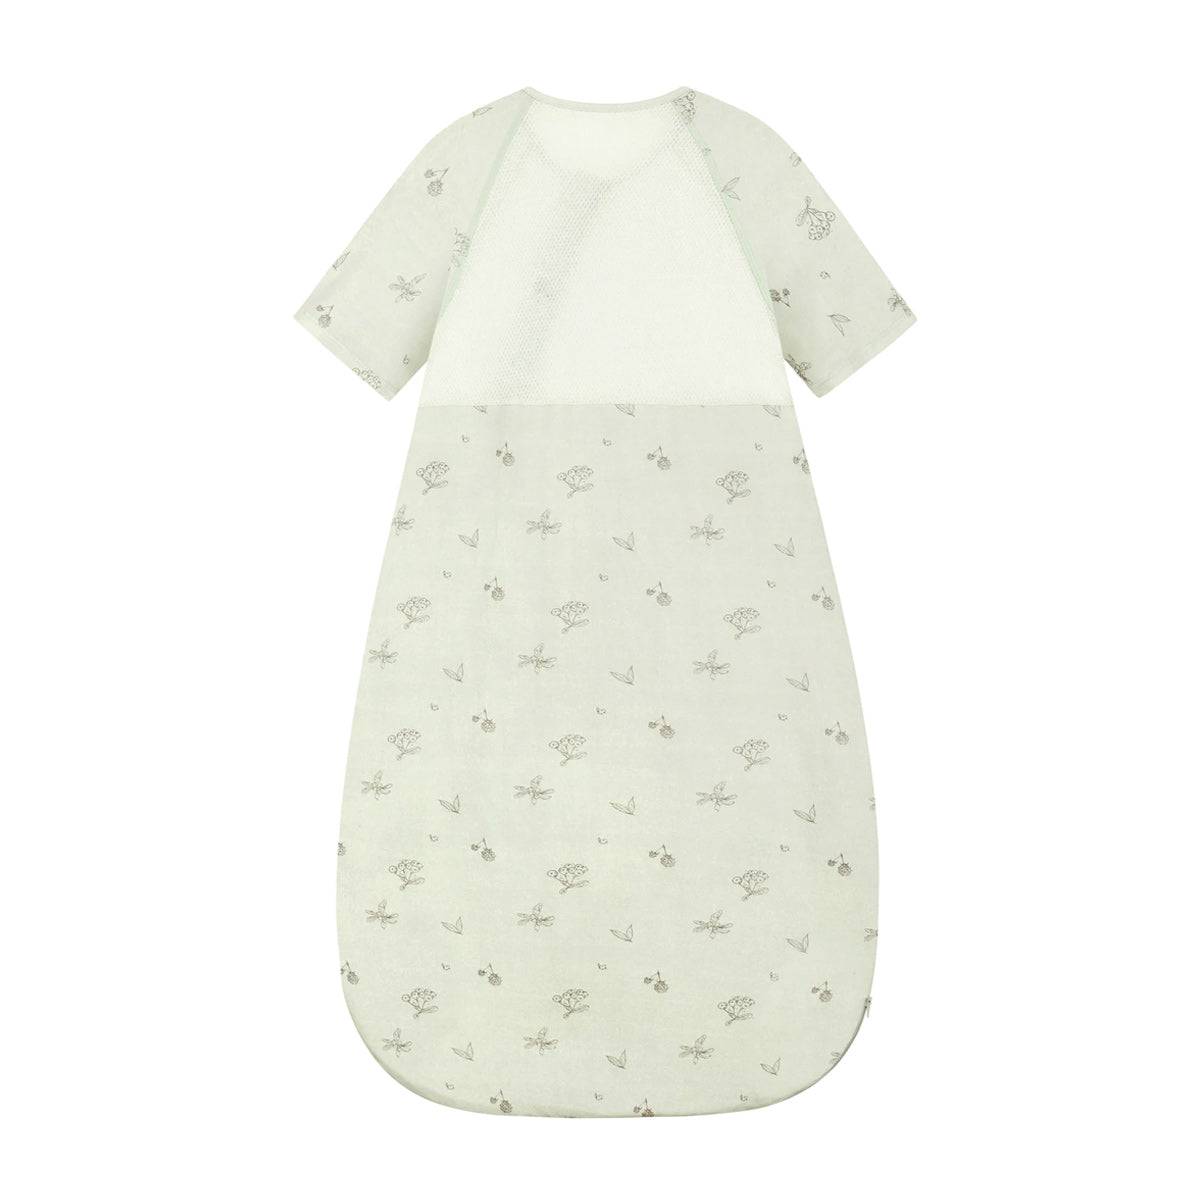 Short Sleeves Baby Sleep Sack With Mesh Cotton - Bacca Mint